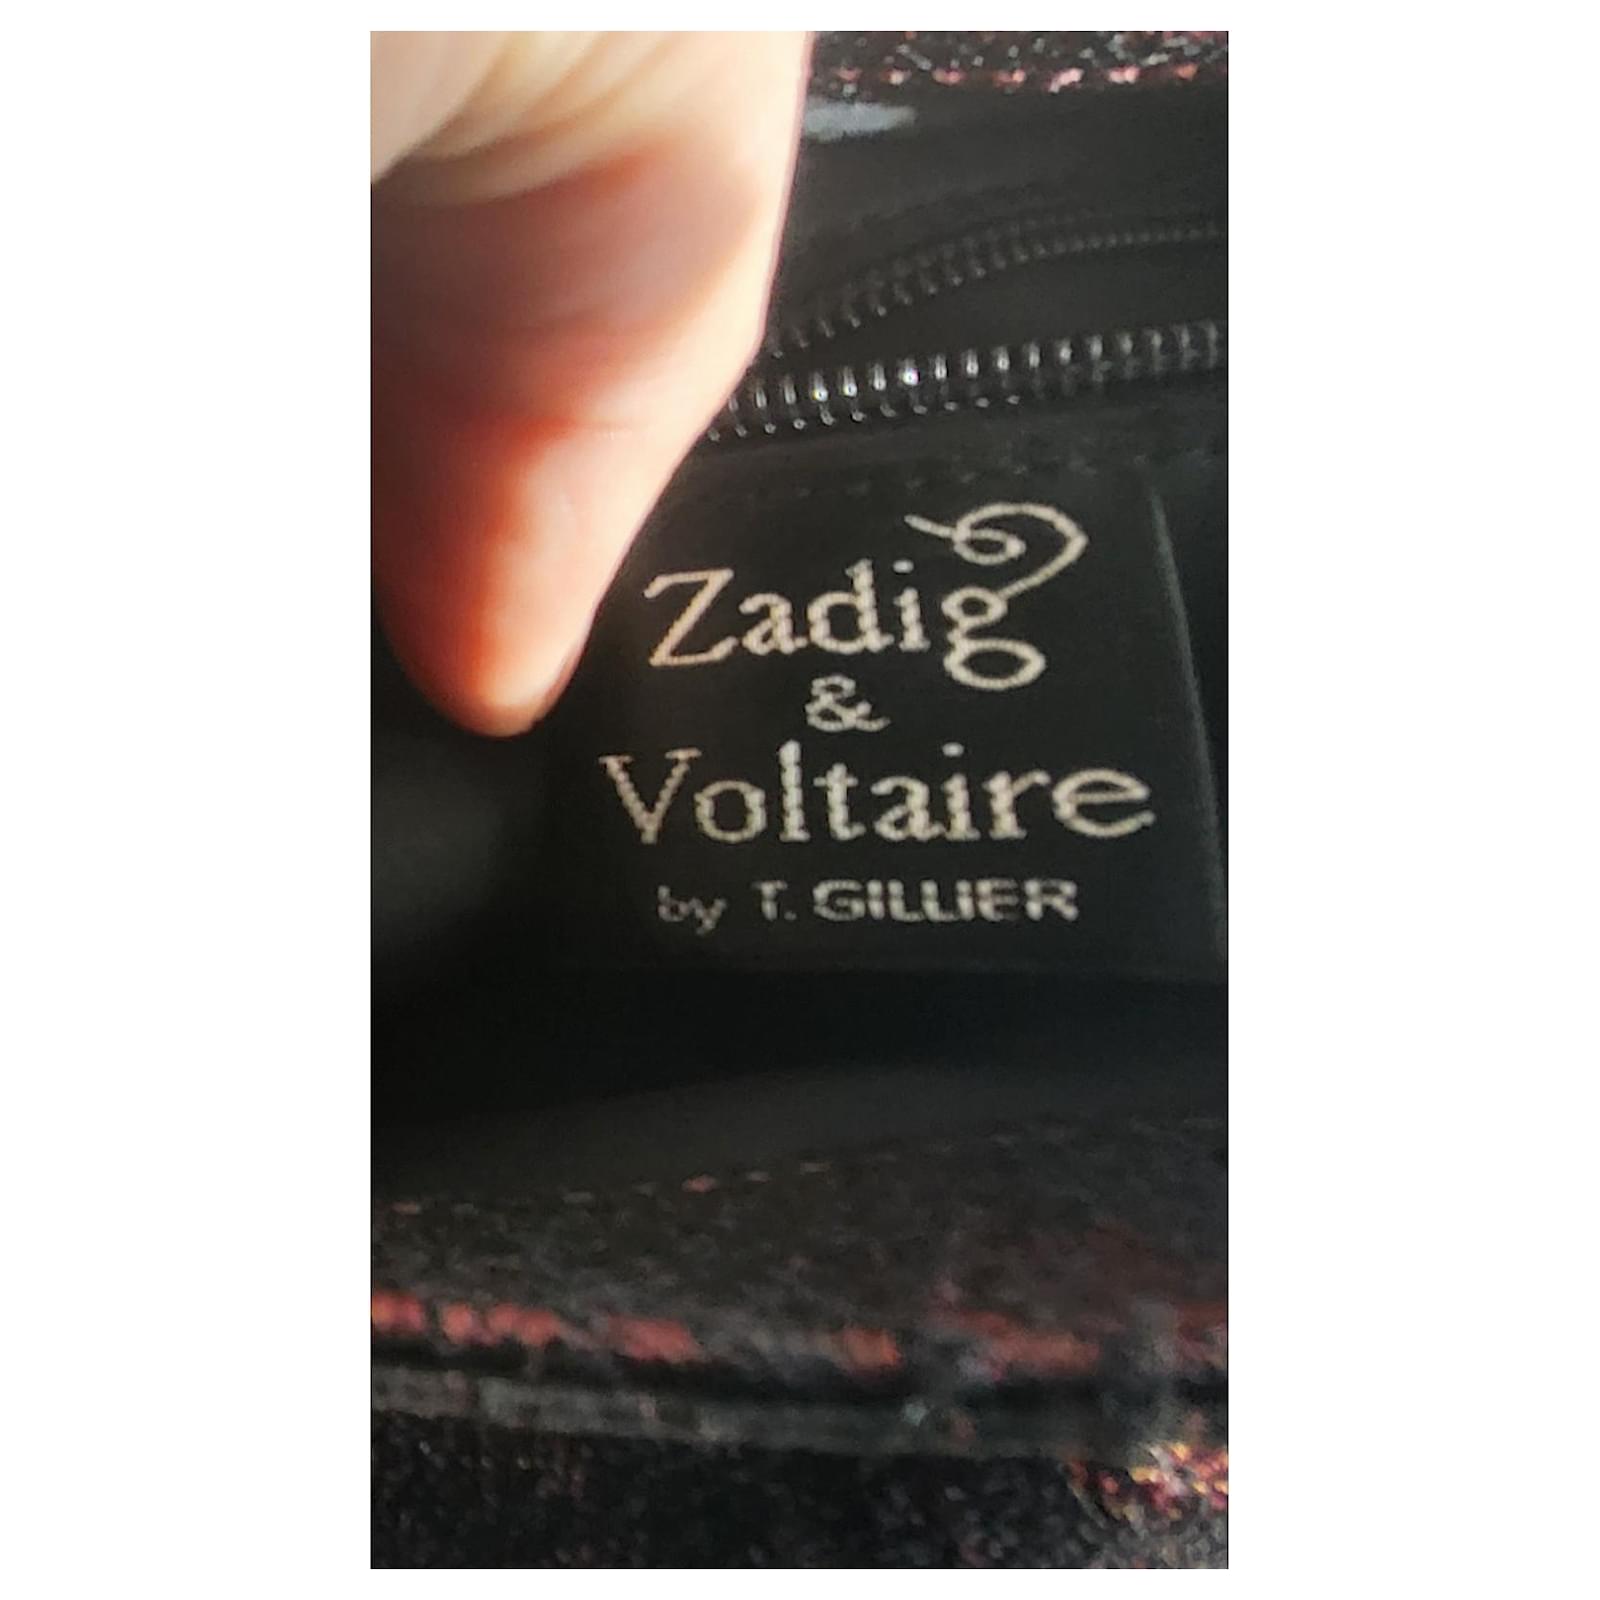 Zadig & Voltaire - by Thierry Gillier (Hardcover)